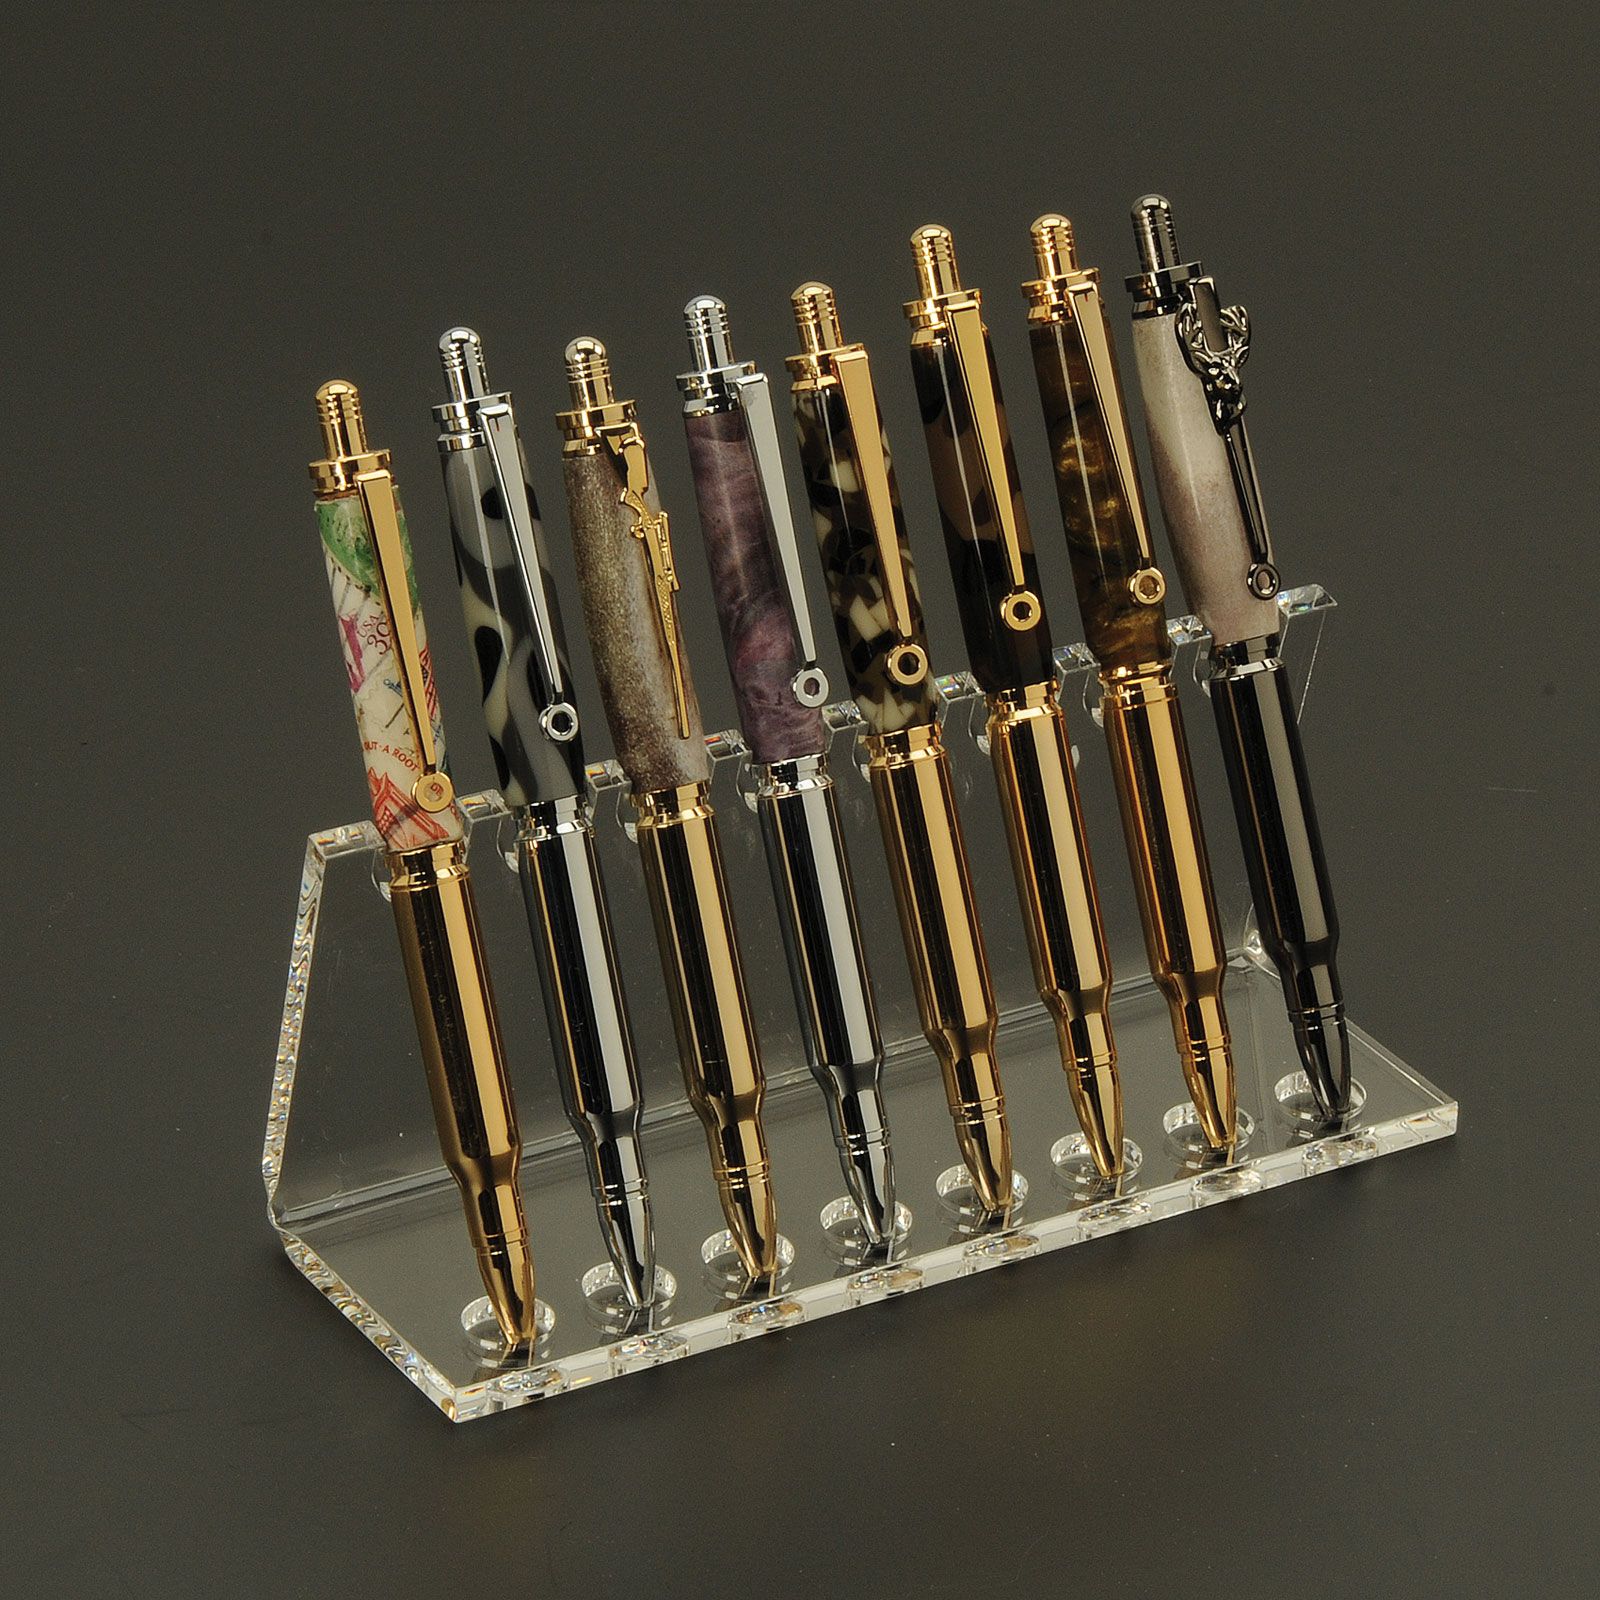 8 Pen Economy Acrylic Pen Display Stand at Penn State Industries